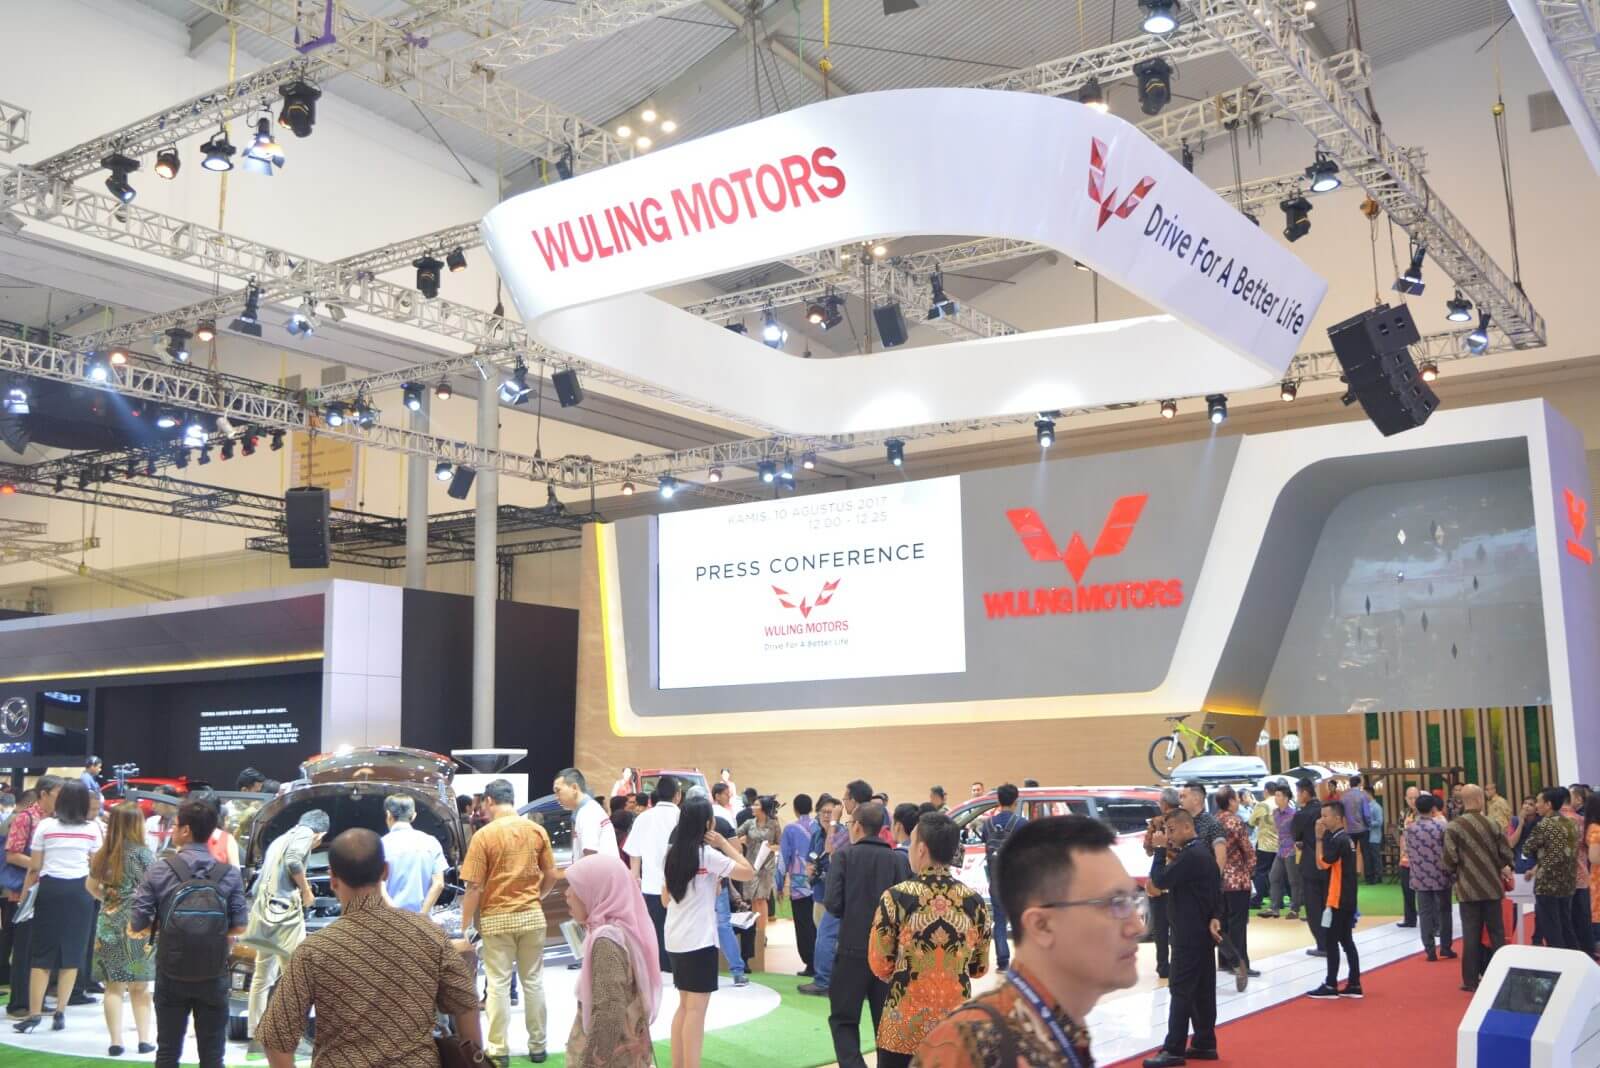 Image Wuling Motors Exposes “My Wuling My Home” Concept at GIIAS 2017